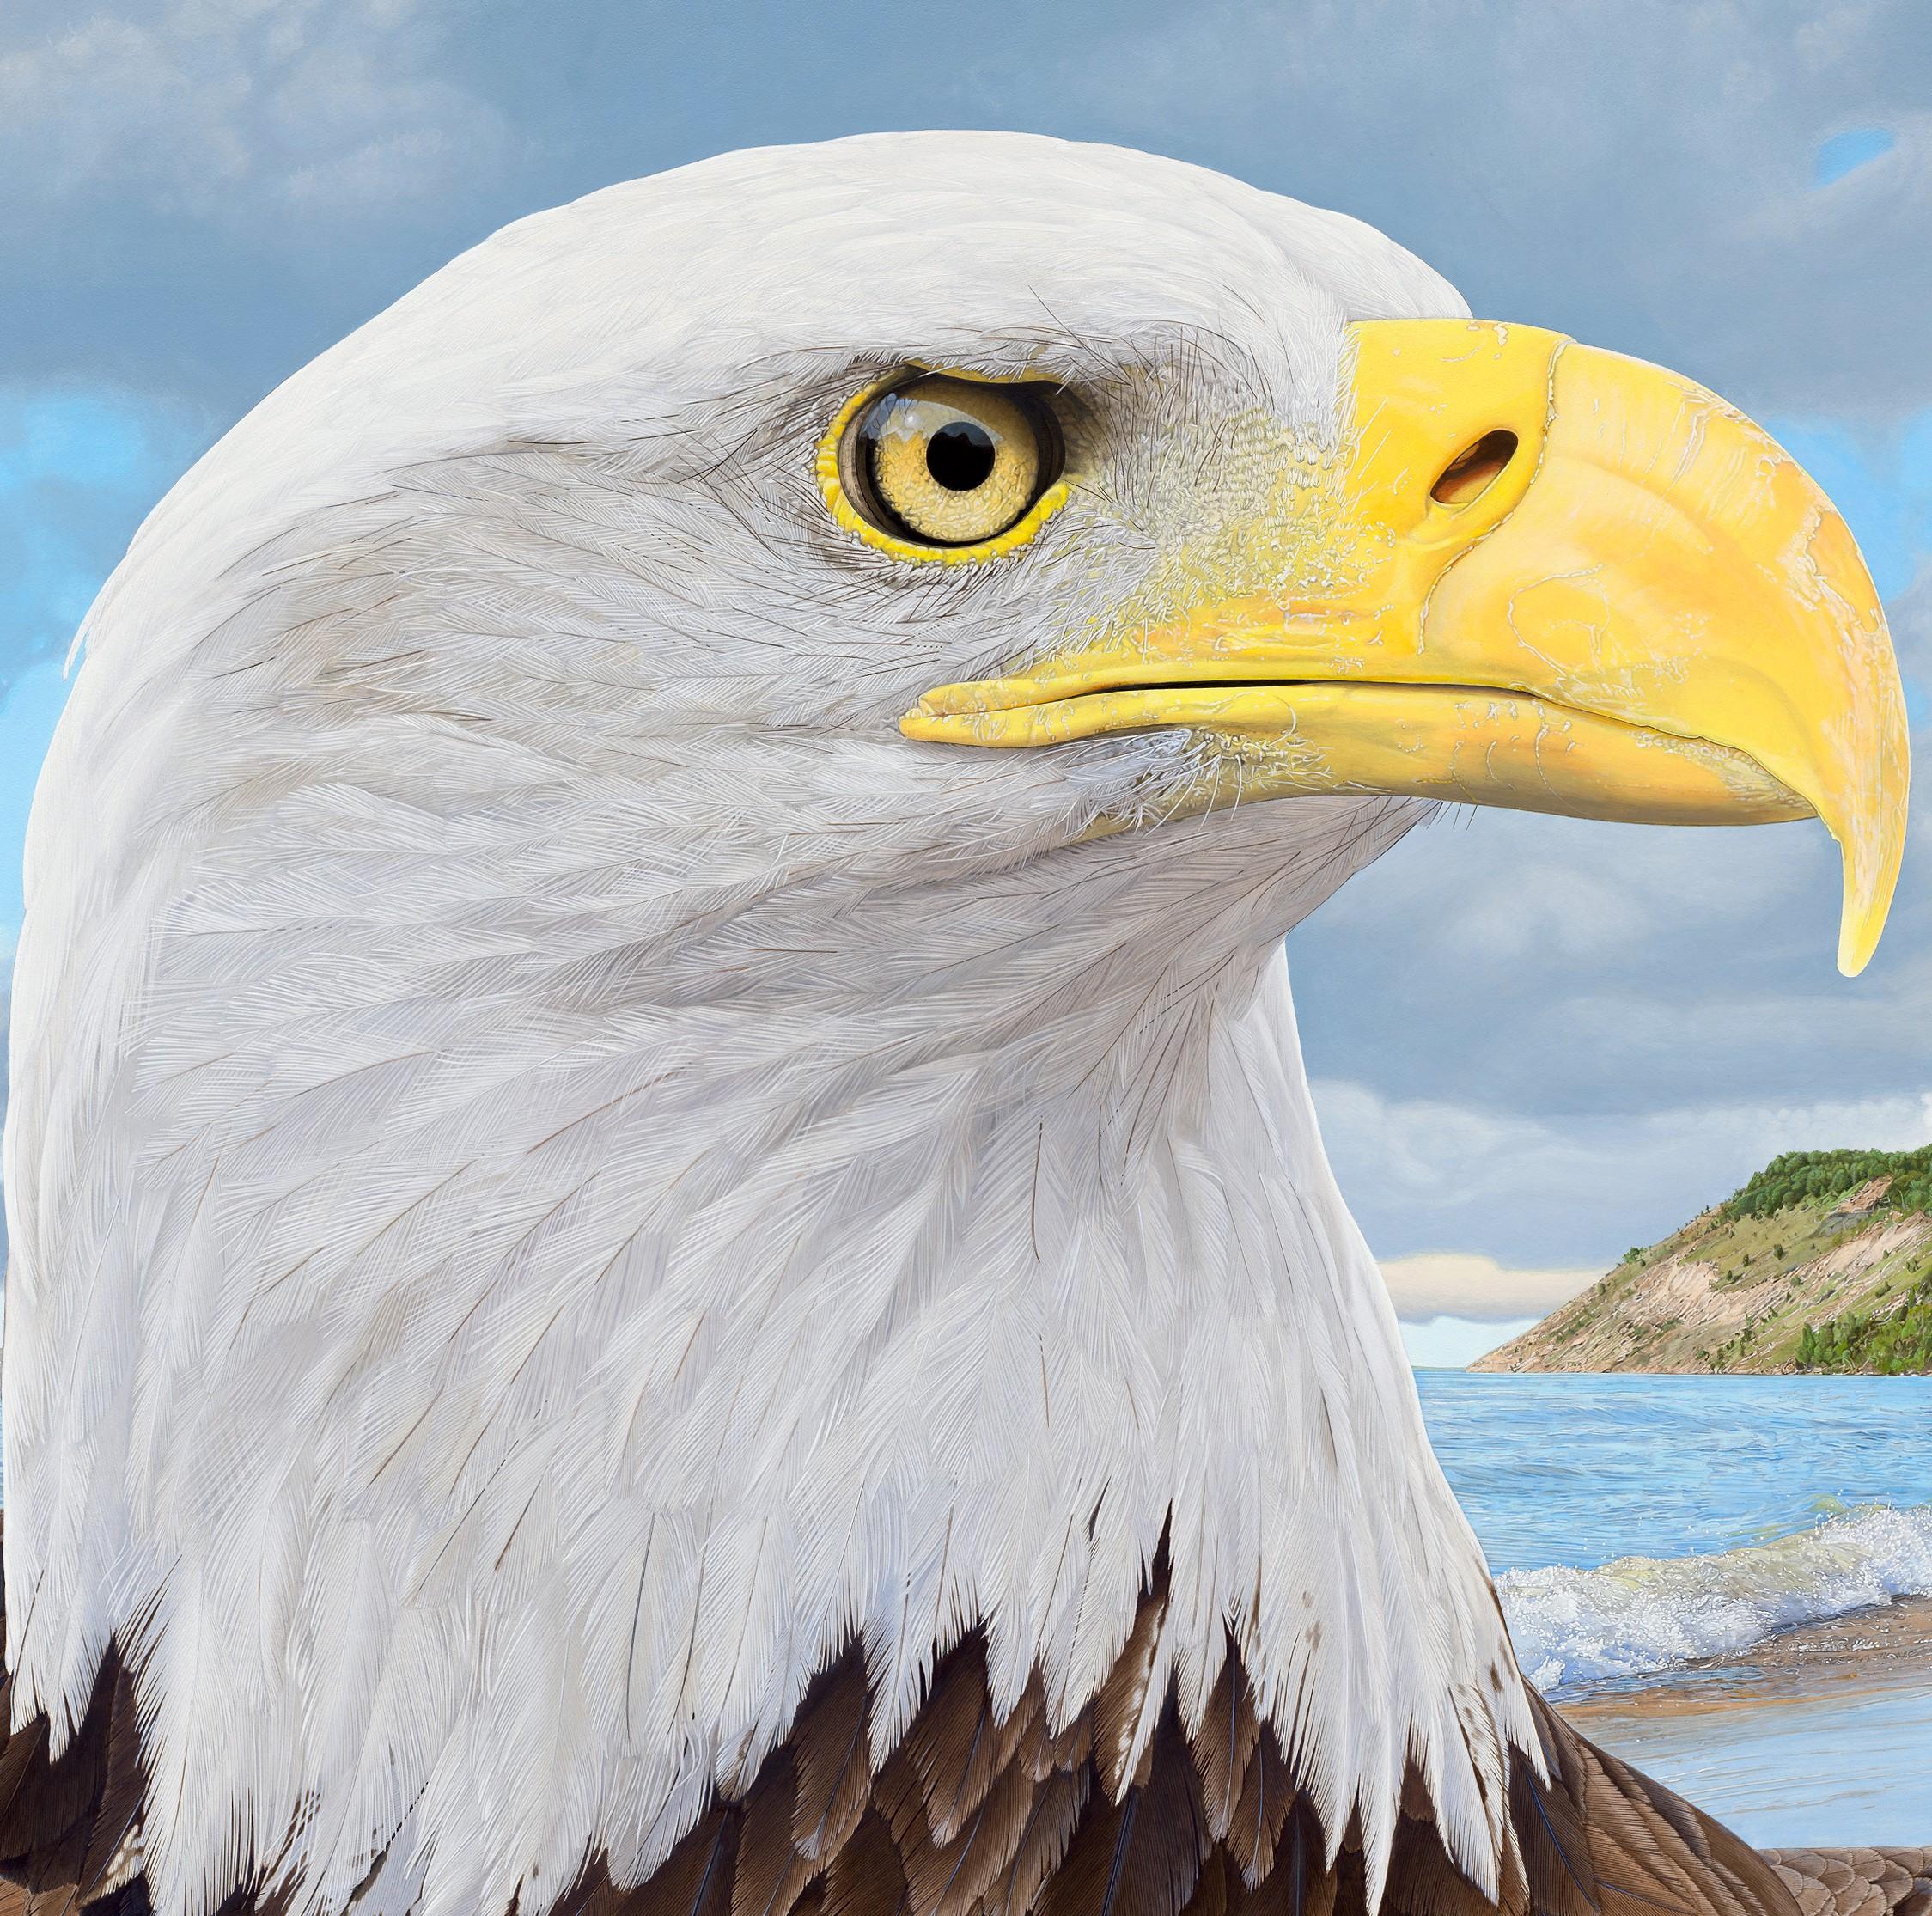 Eagle at Empire Bluff - Photorealistic Portrait of a Female Bald Eagle, Framed - Painting by Rick Pas